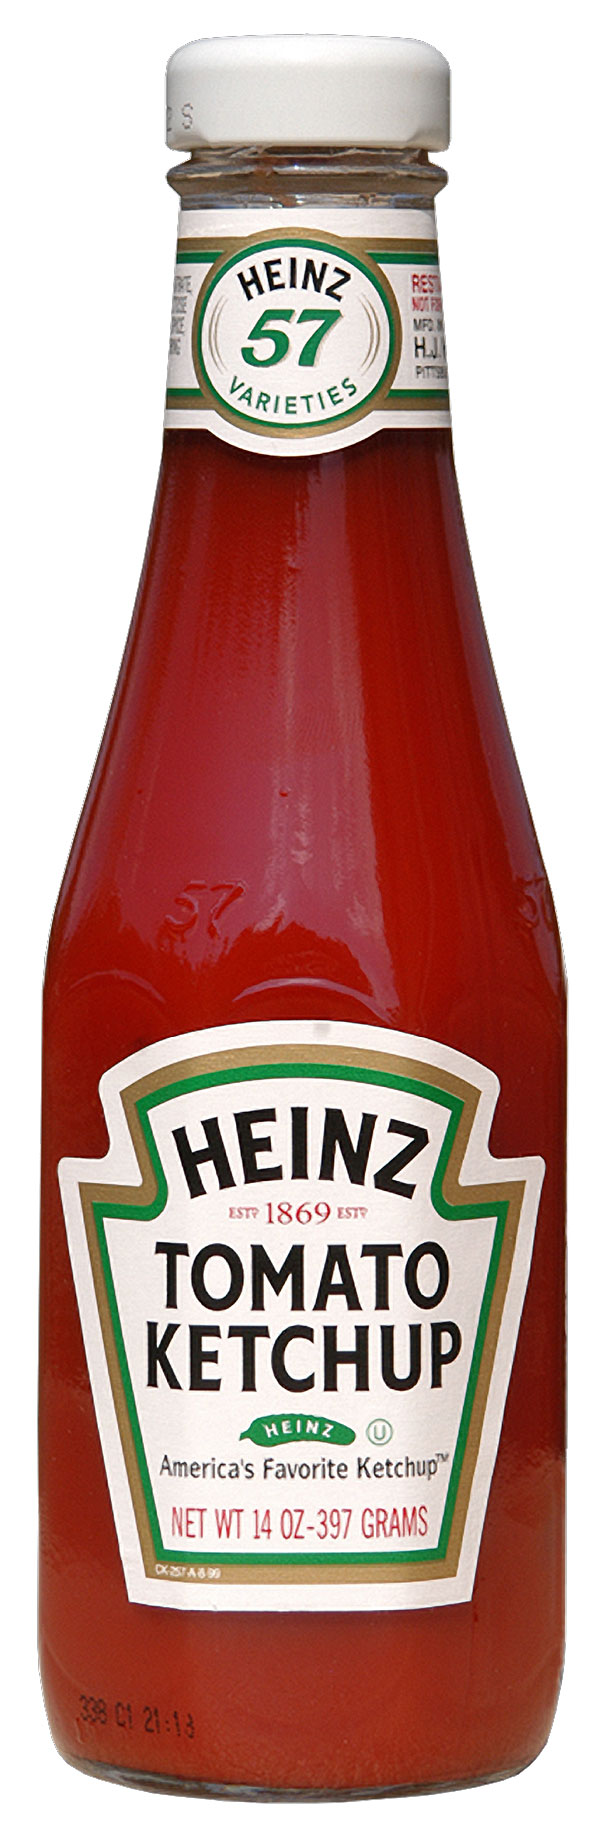 *HOT* $1/1 Heinz Ketchup + Other Printable Coupons